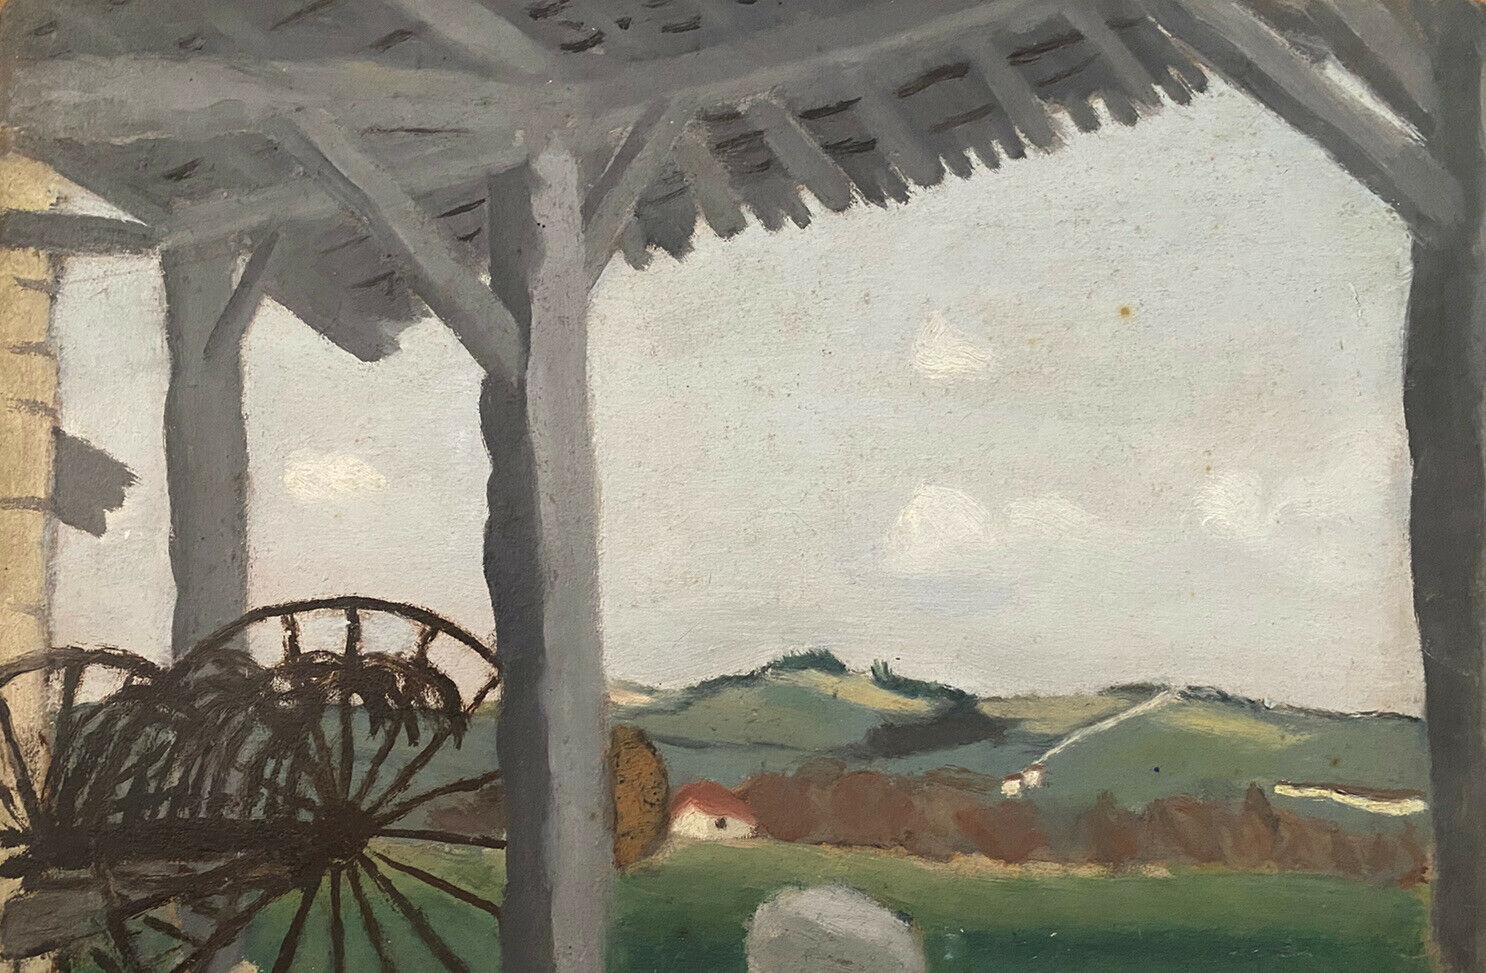 "The Old Barn"
by Geneviève Zondervan (French 1922-2013)
oil painting on board, stamped verso

board: 10 x 14.25 inches

20th century oil painting on board by the French artist, Geneviève Zondervan (French 1922-2013). The painting has excellent